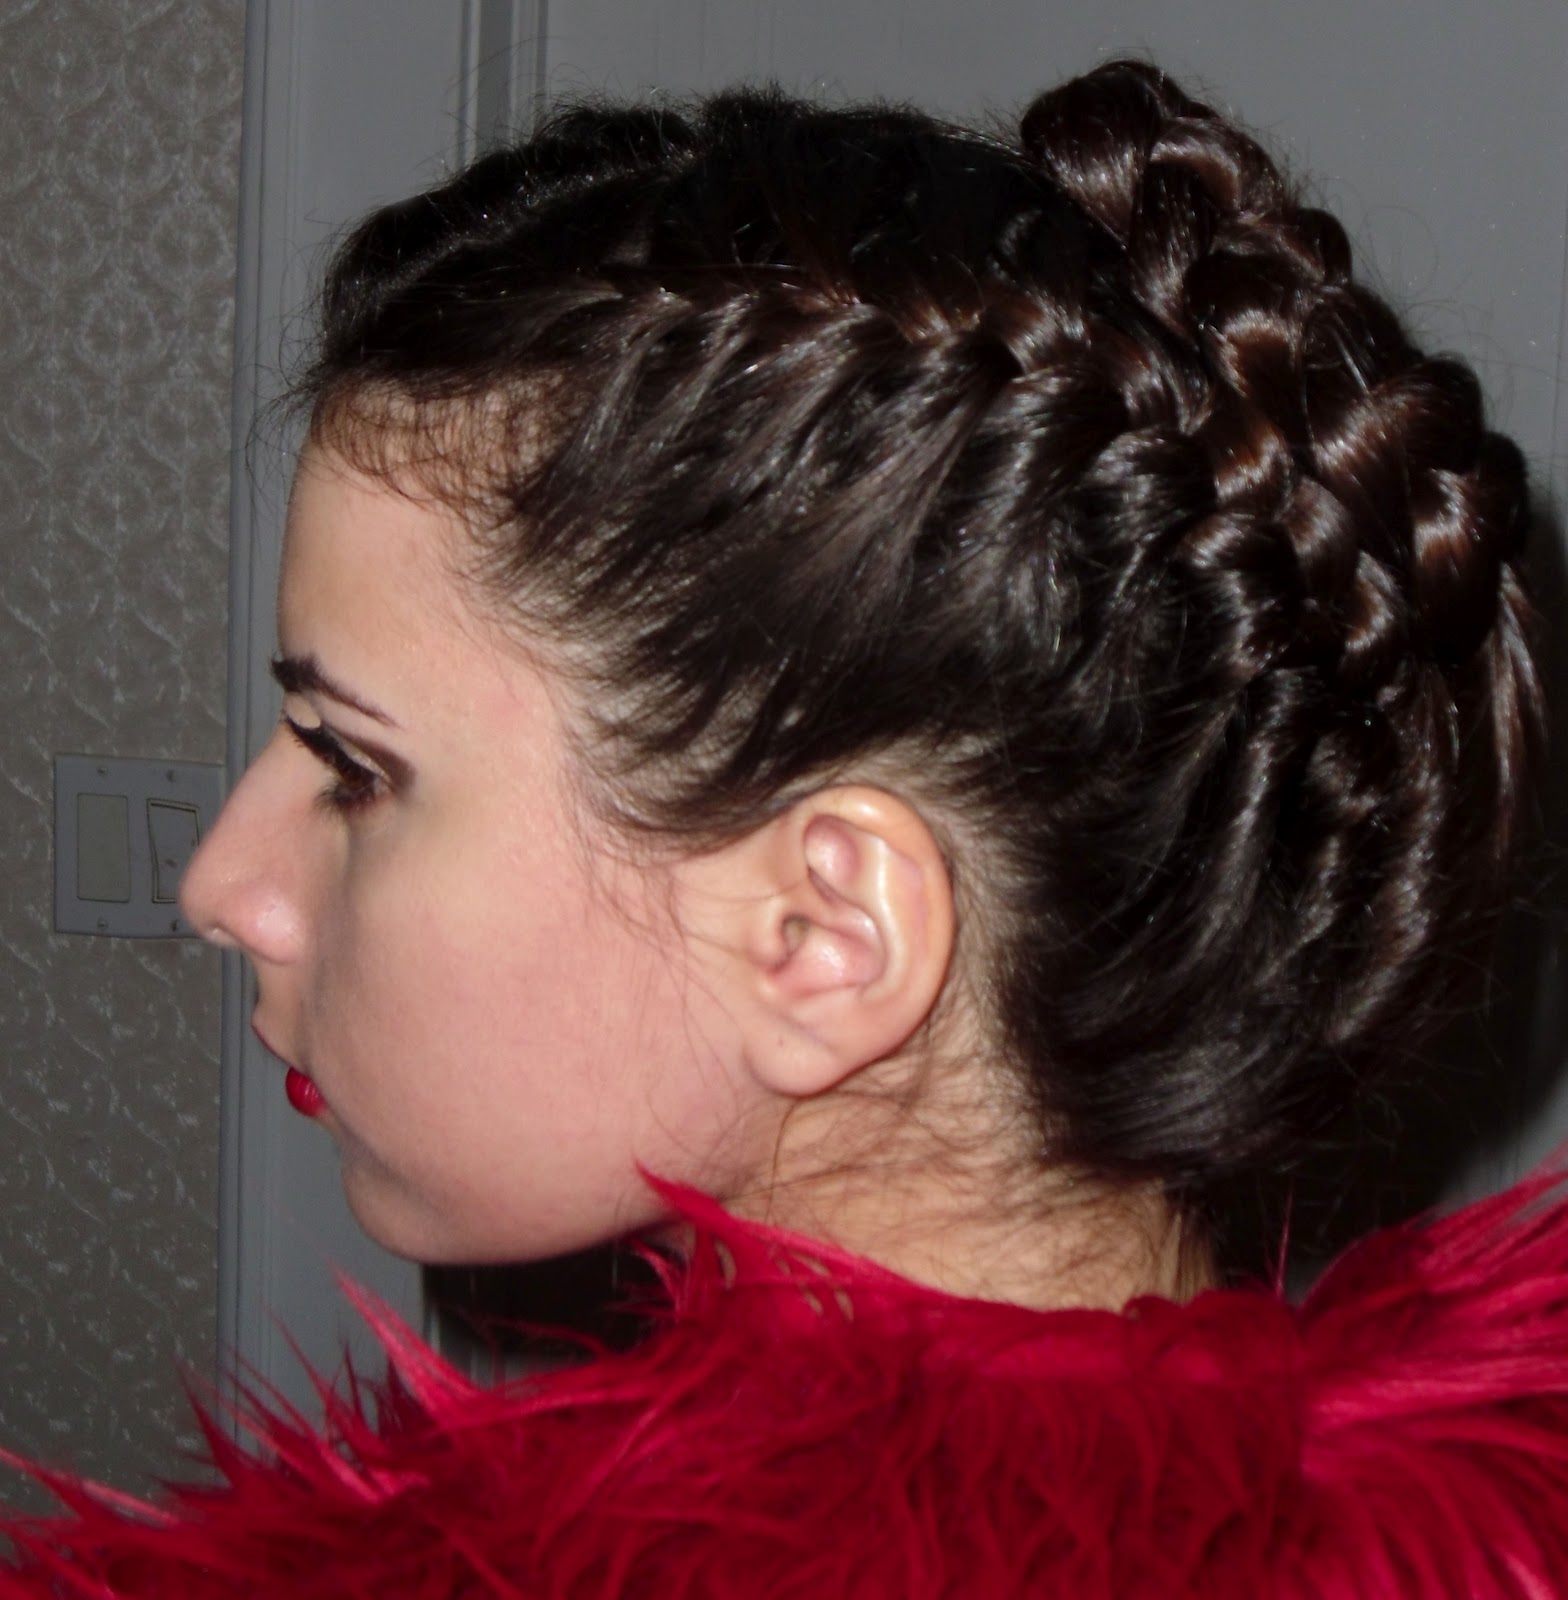 braided side updo